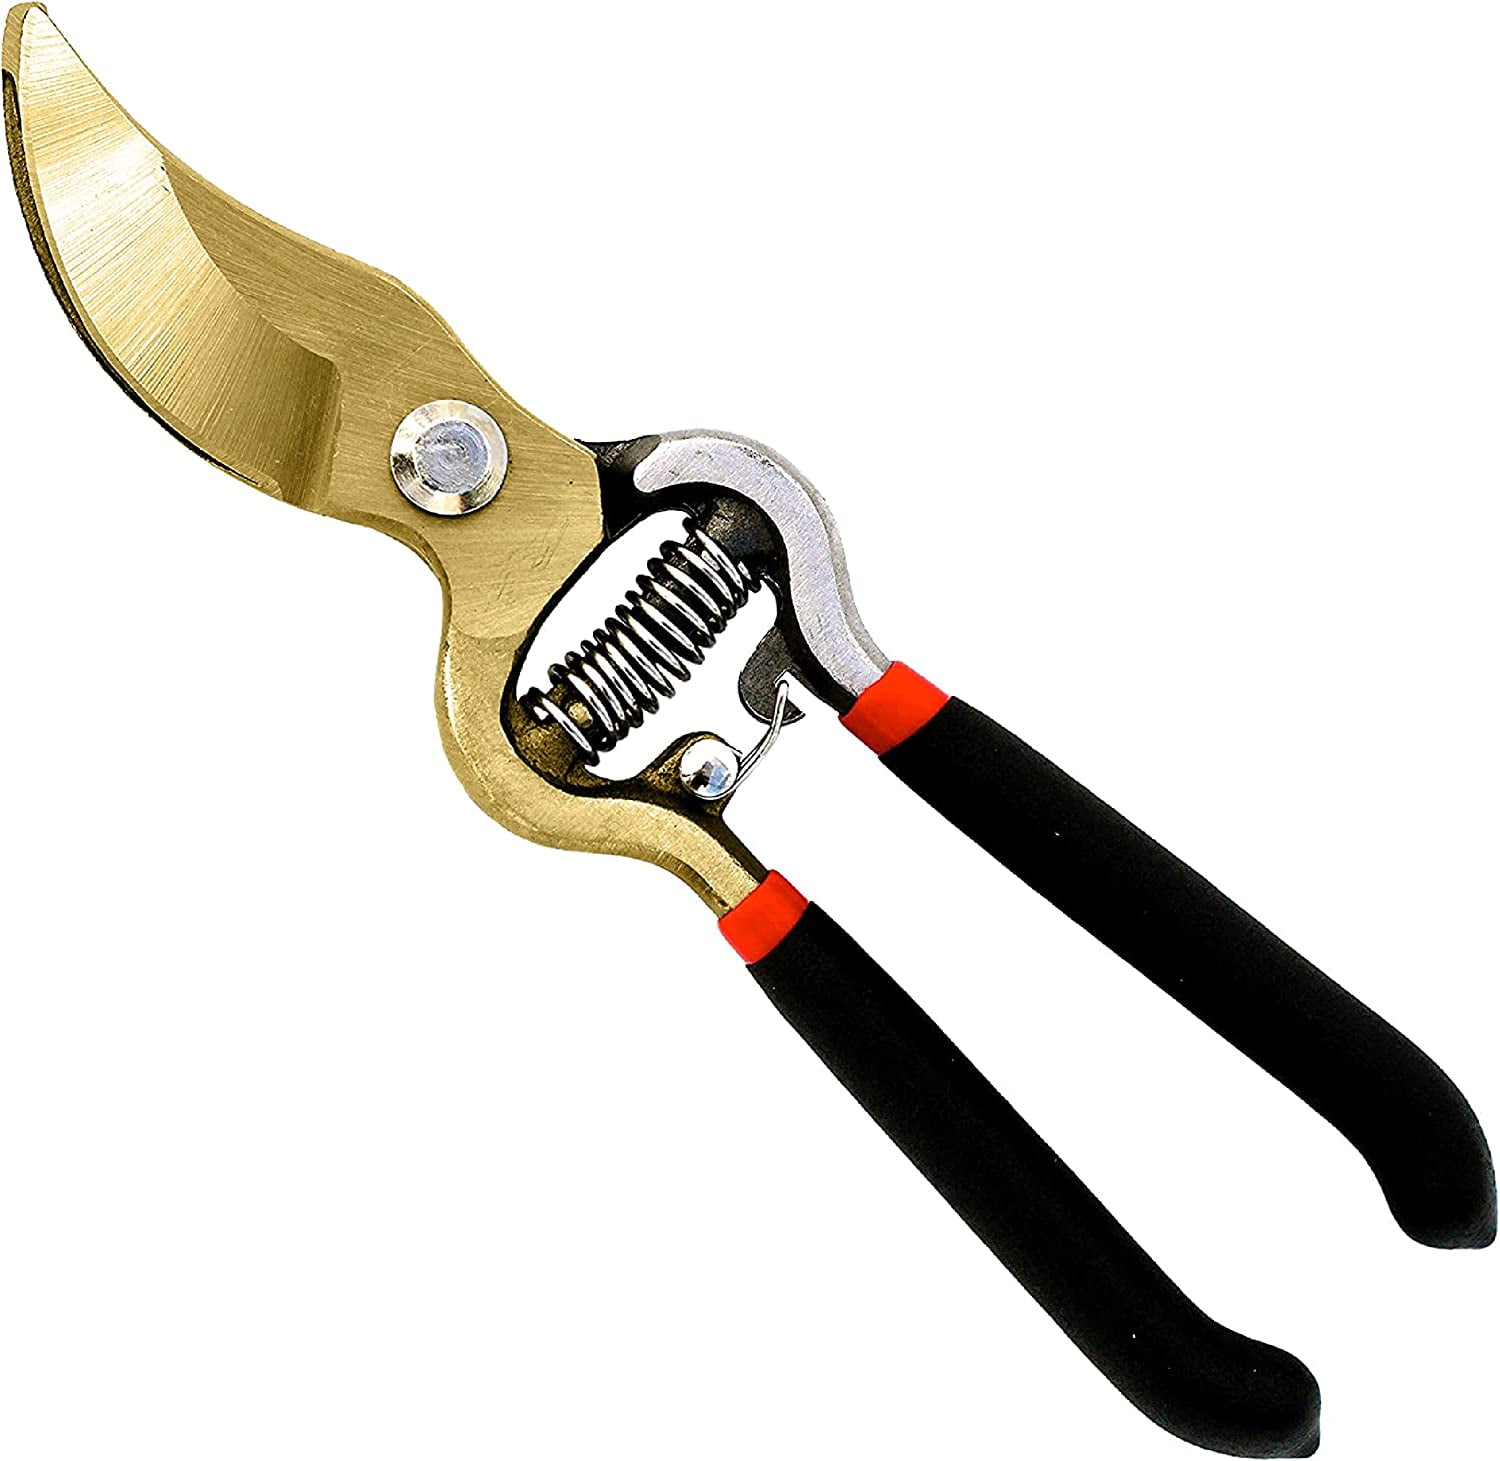 VITALALL Gardening Tools：Garden Shear with Sharp Steel Blades,Pruning  Shears Cutting Shears Handheld Pruners Clippers Hand-Lopper for Gardening  for